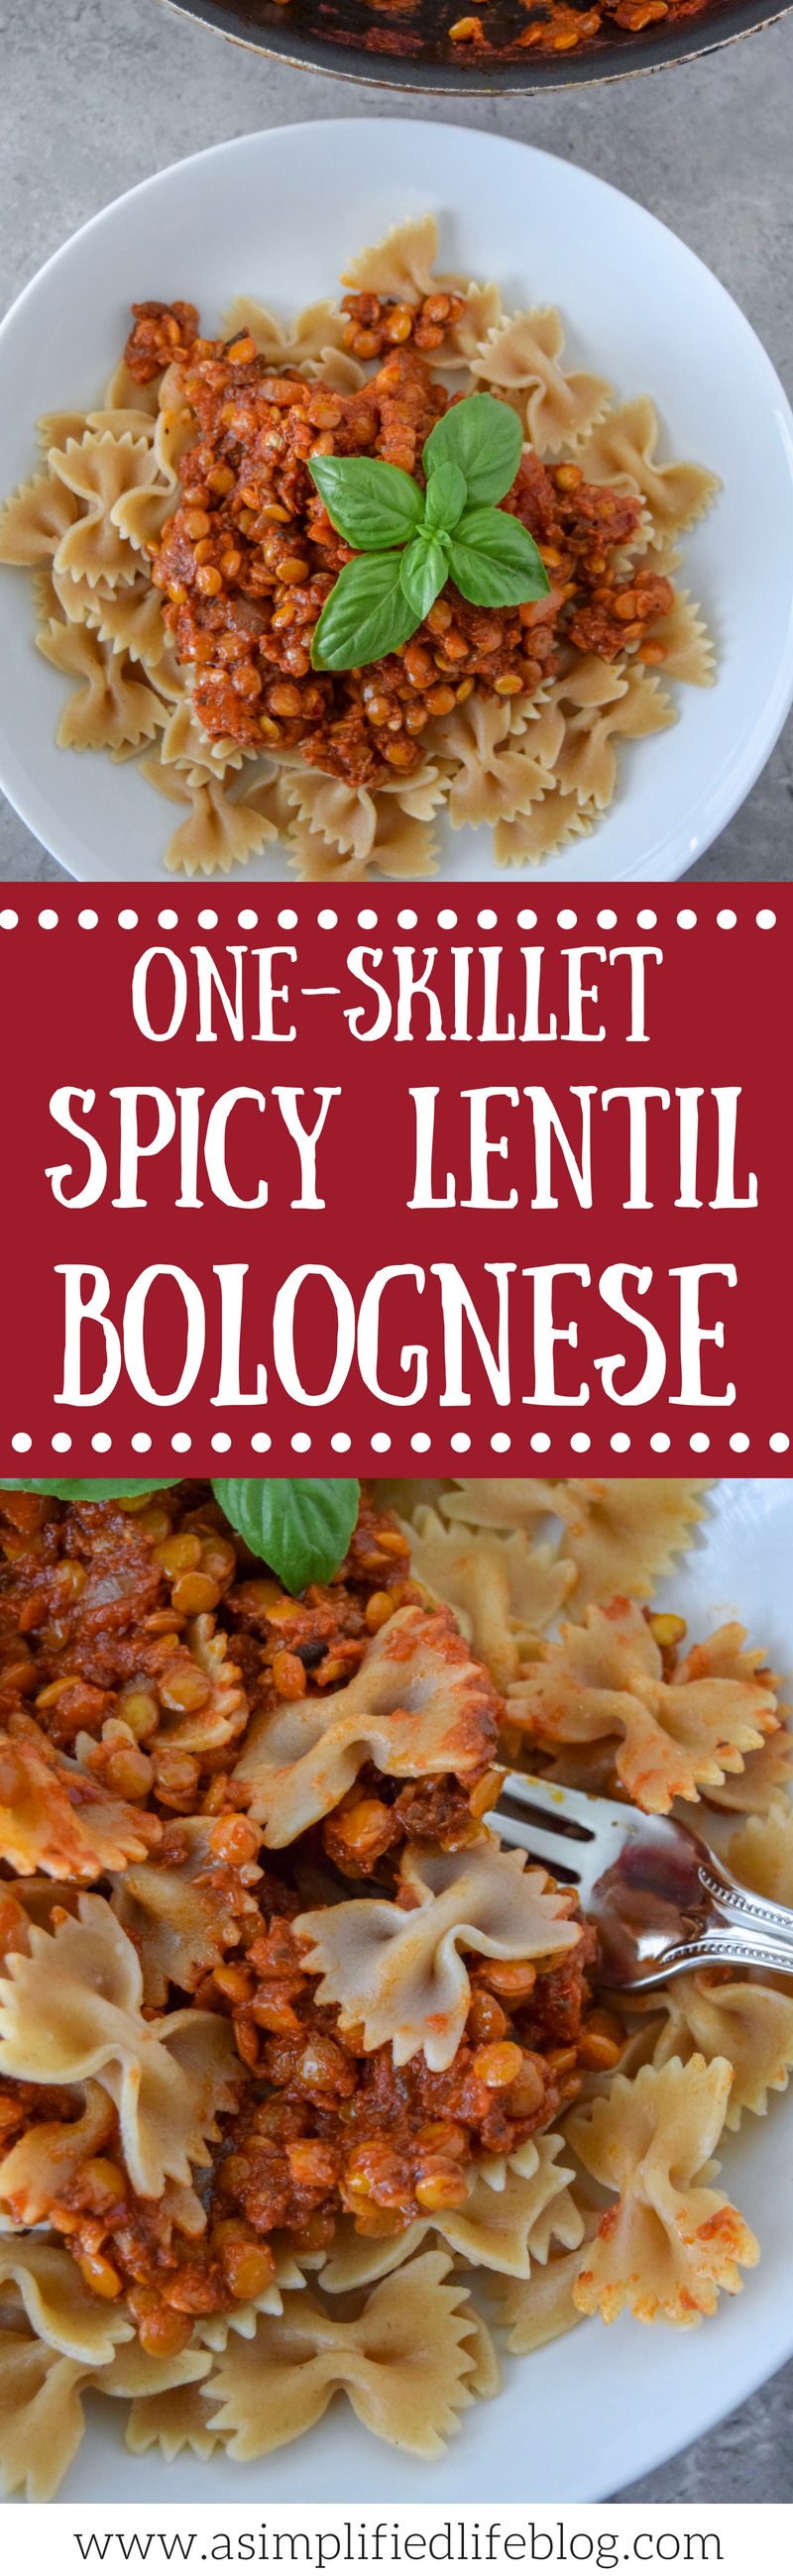 This One-Skillet Spicy Lentil Bolognese is perfect for a #meatlessmonday or vegetarian meal! Protein-packed lentils sub in for ground beef in this cozy pasta dish. Use your favorite jarred pasta sauce and any pasta you have on hand for this quick weeknight meal!